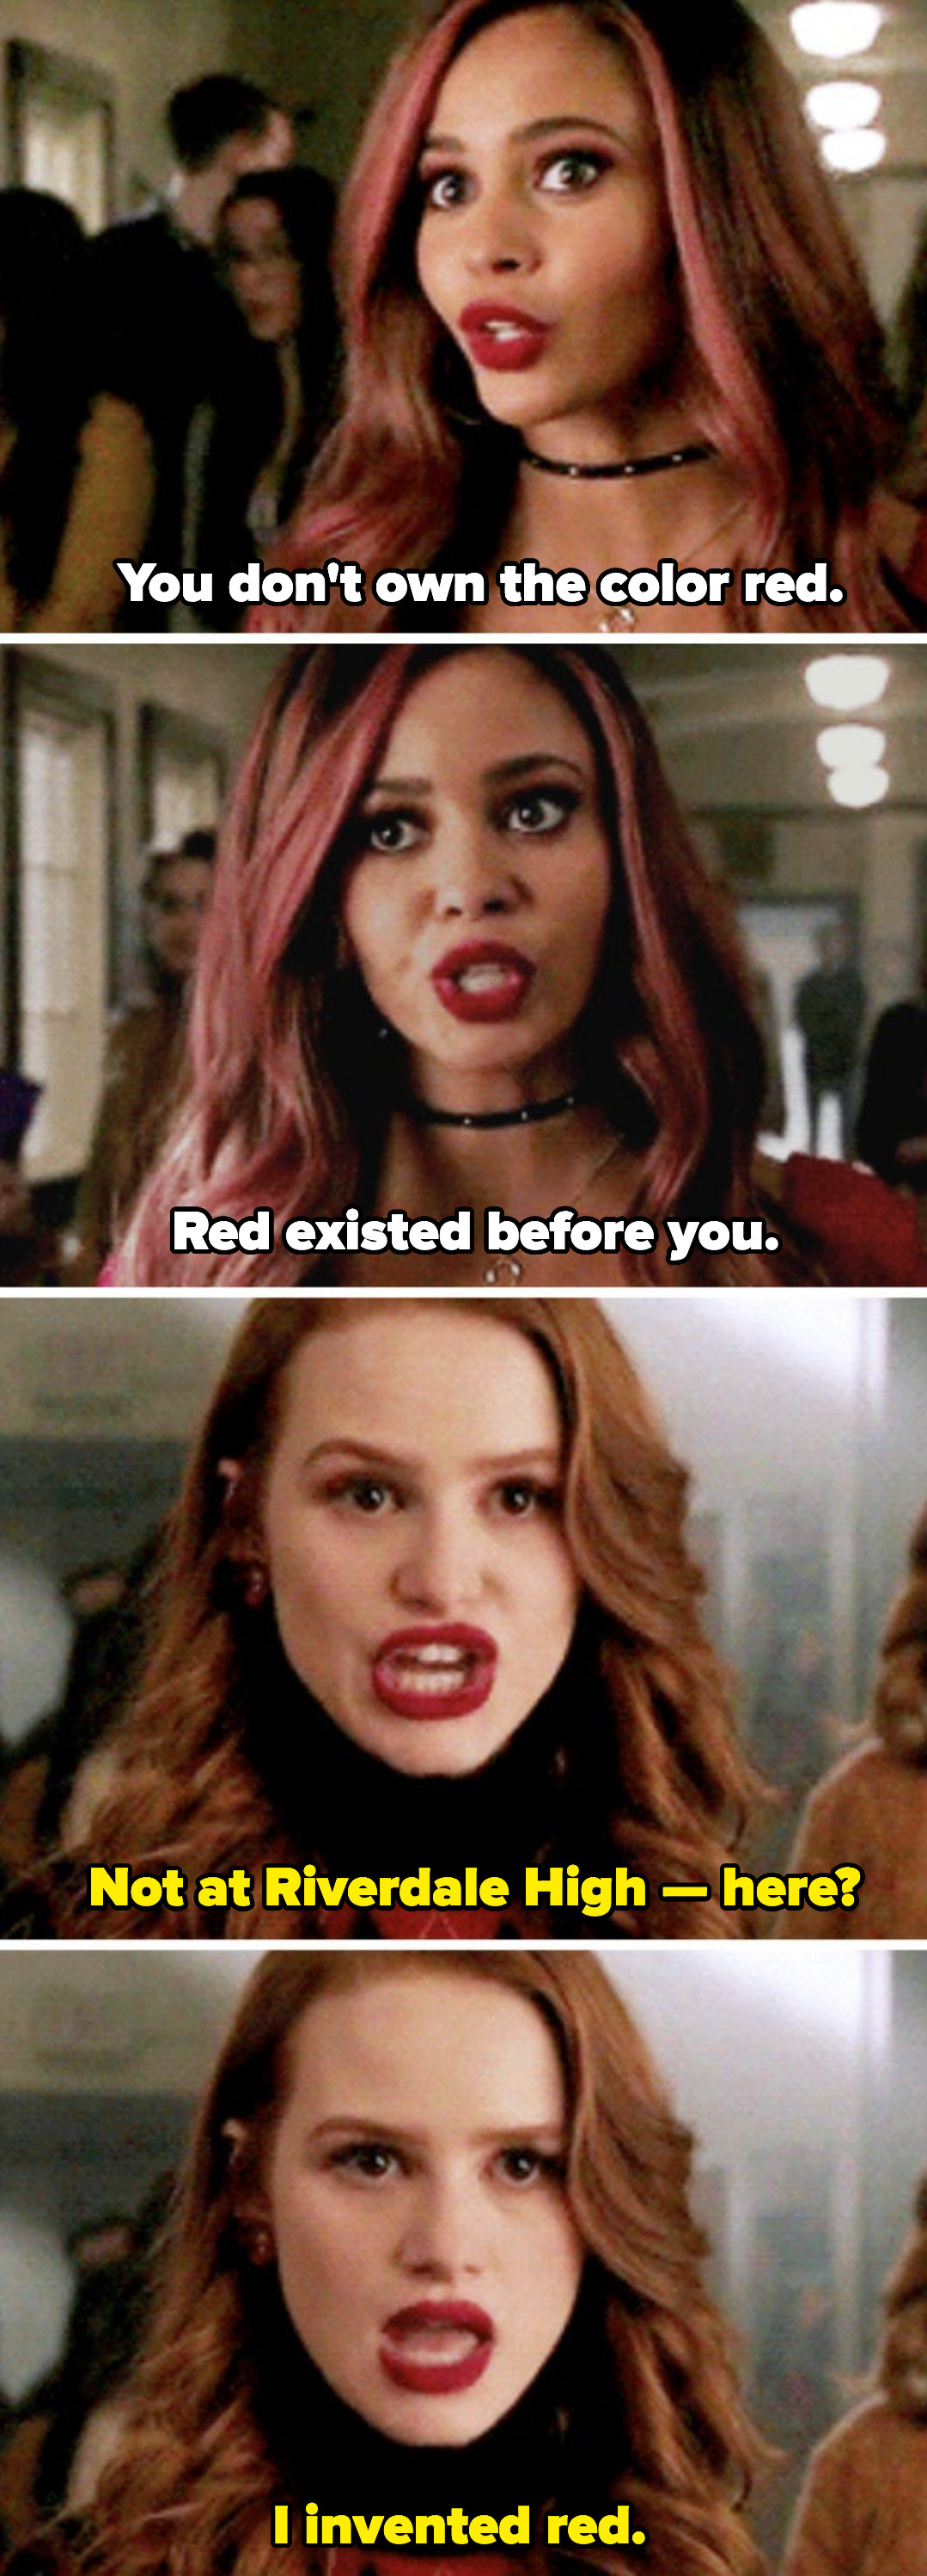 Toni and Cheryl arguing in the school hallway about who invented the color red